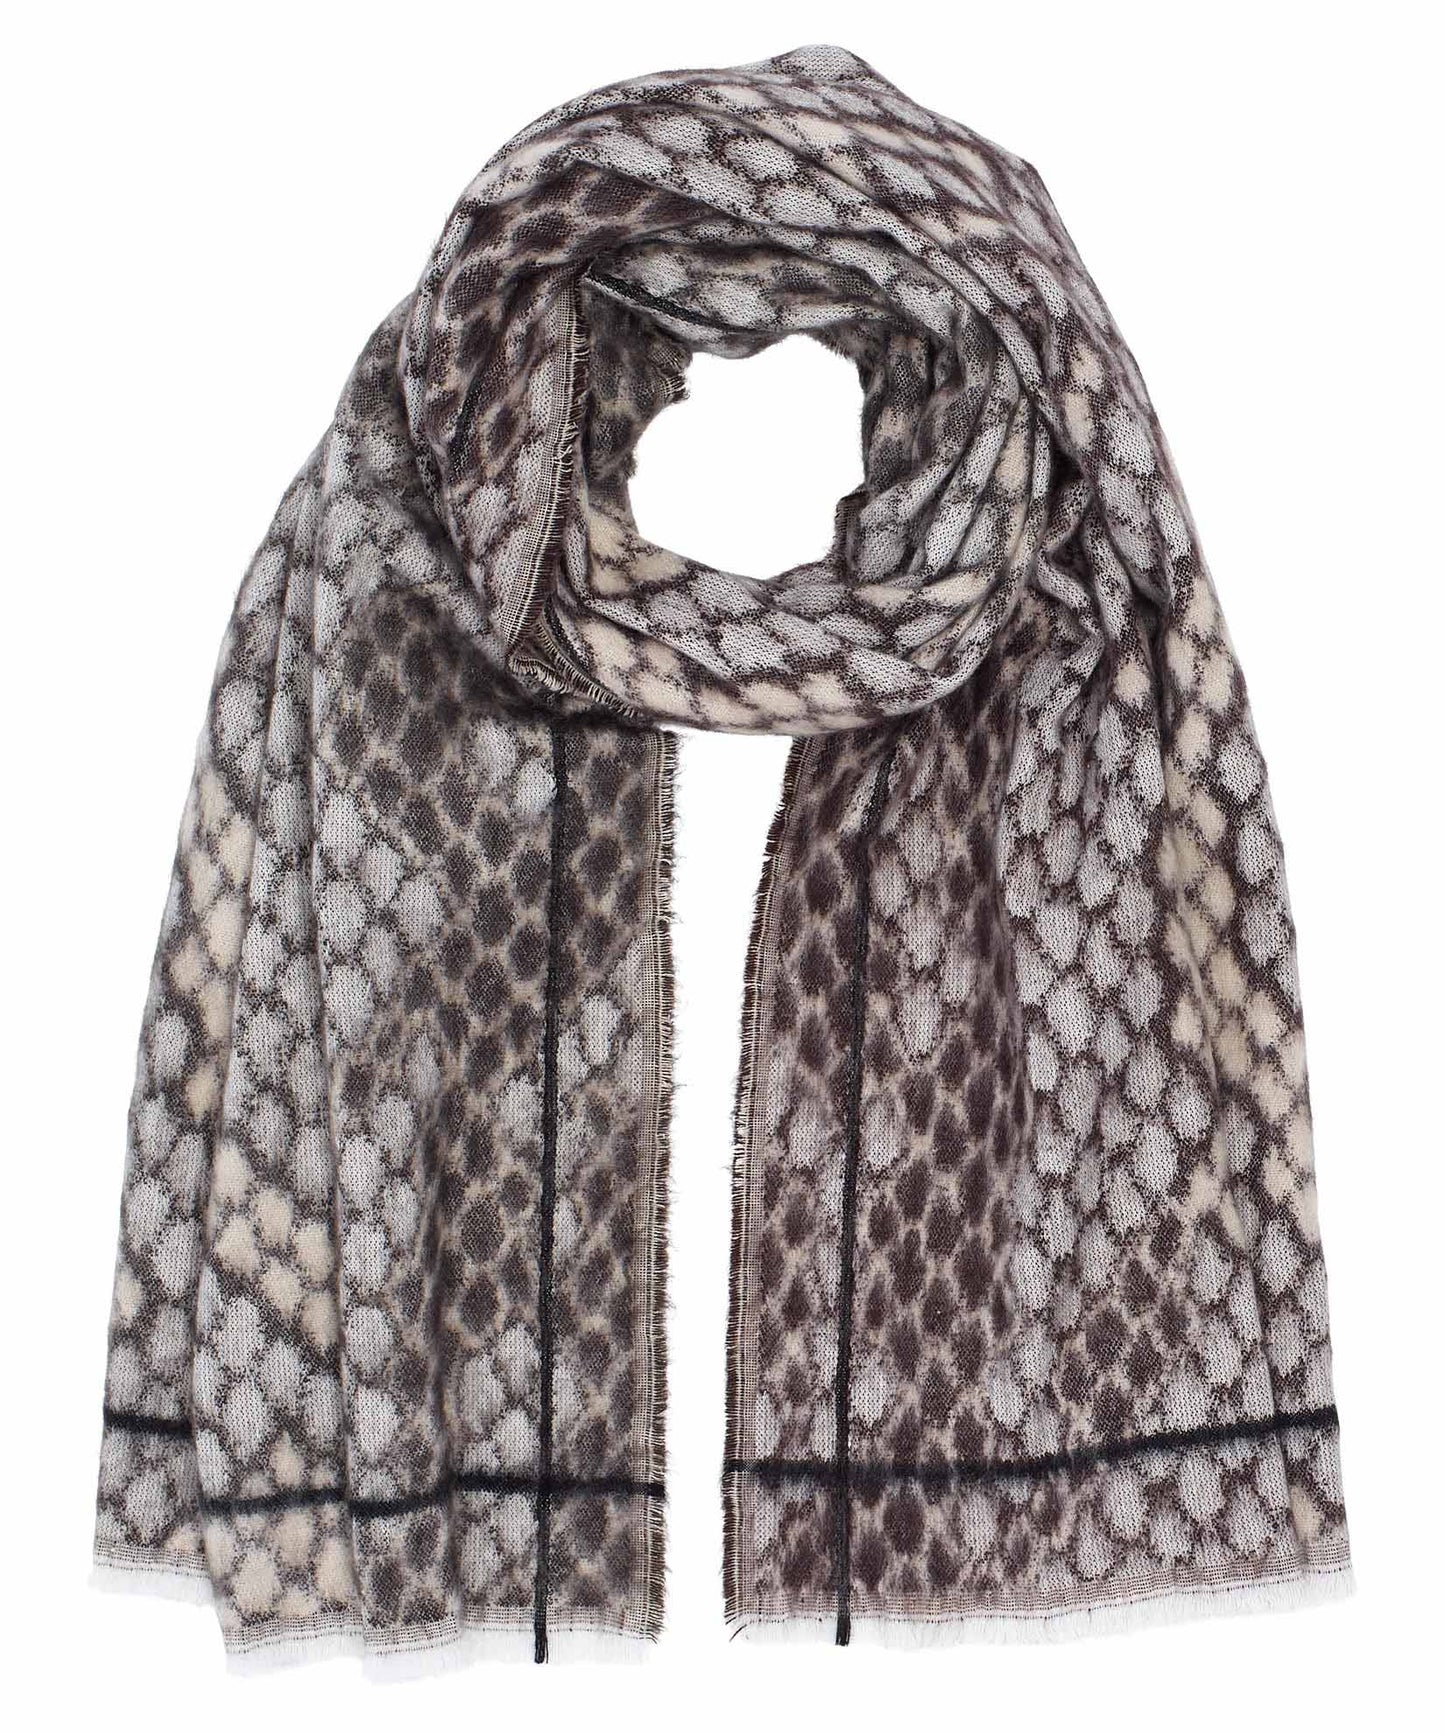 Python Jacquard Scarf in color Marshmallow